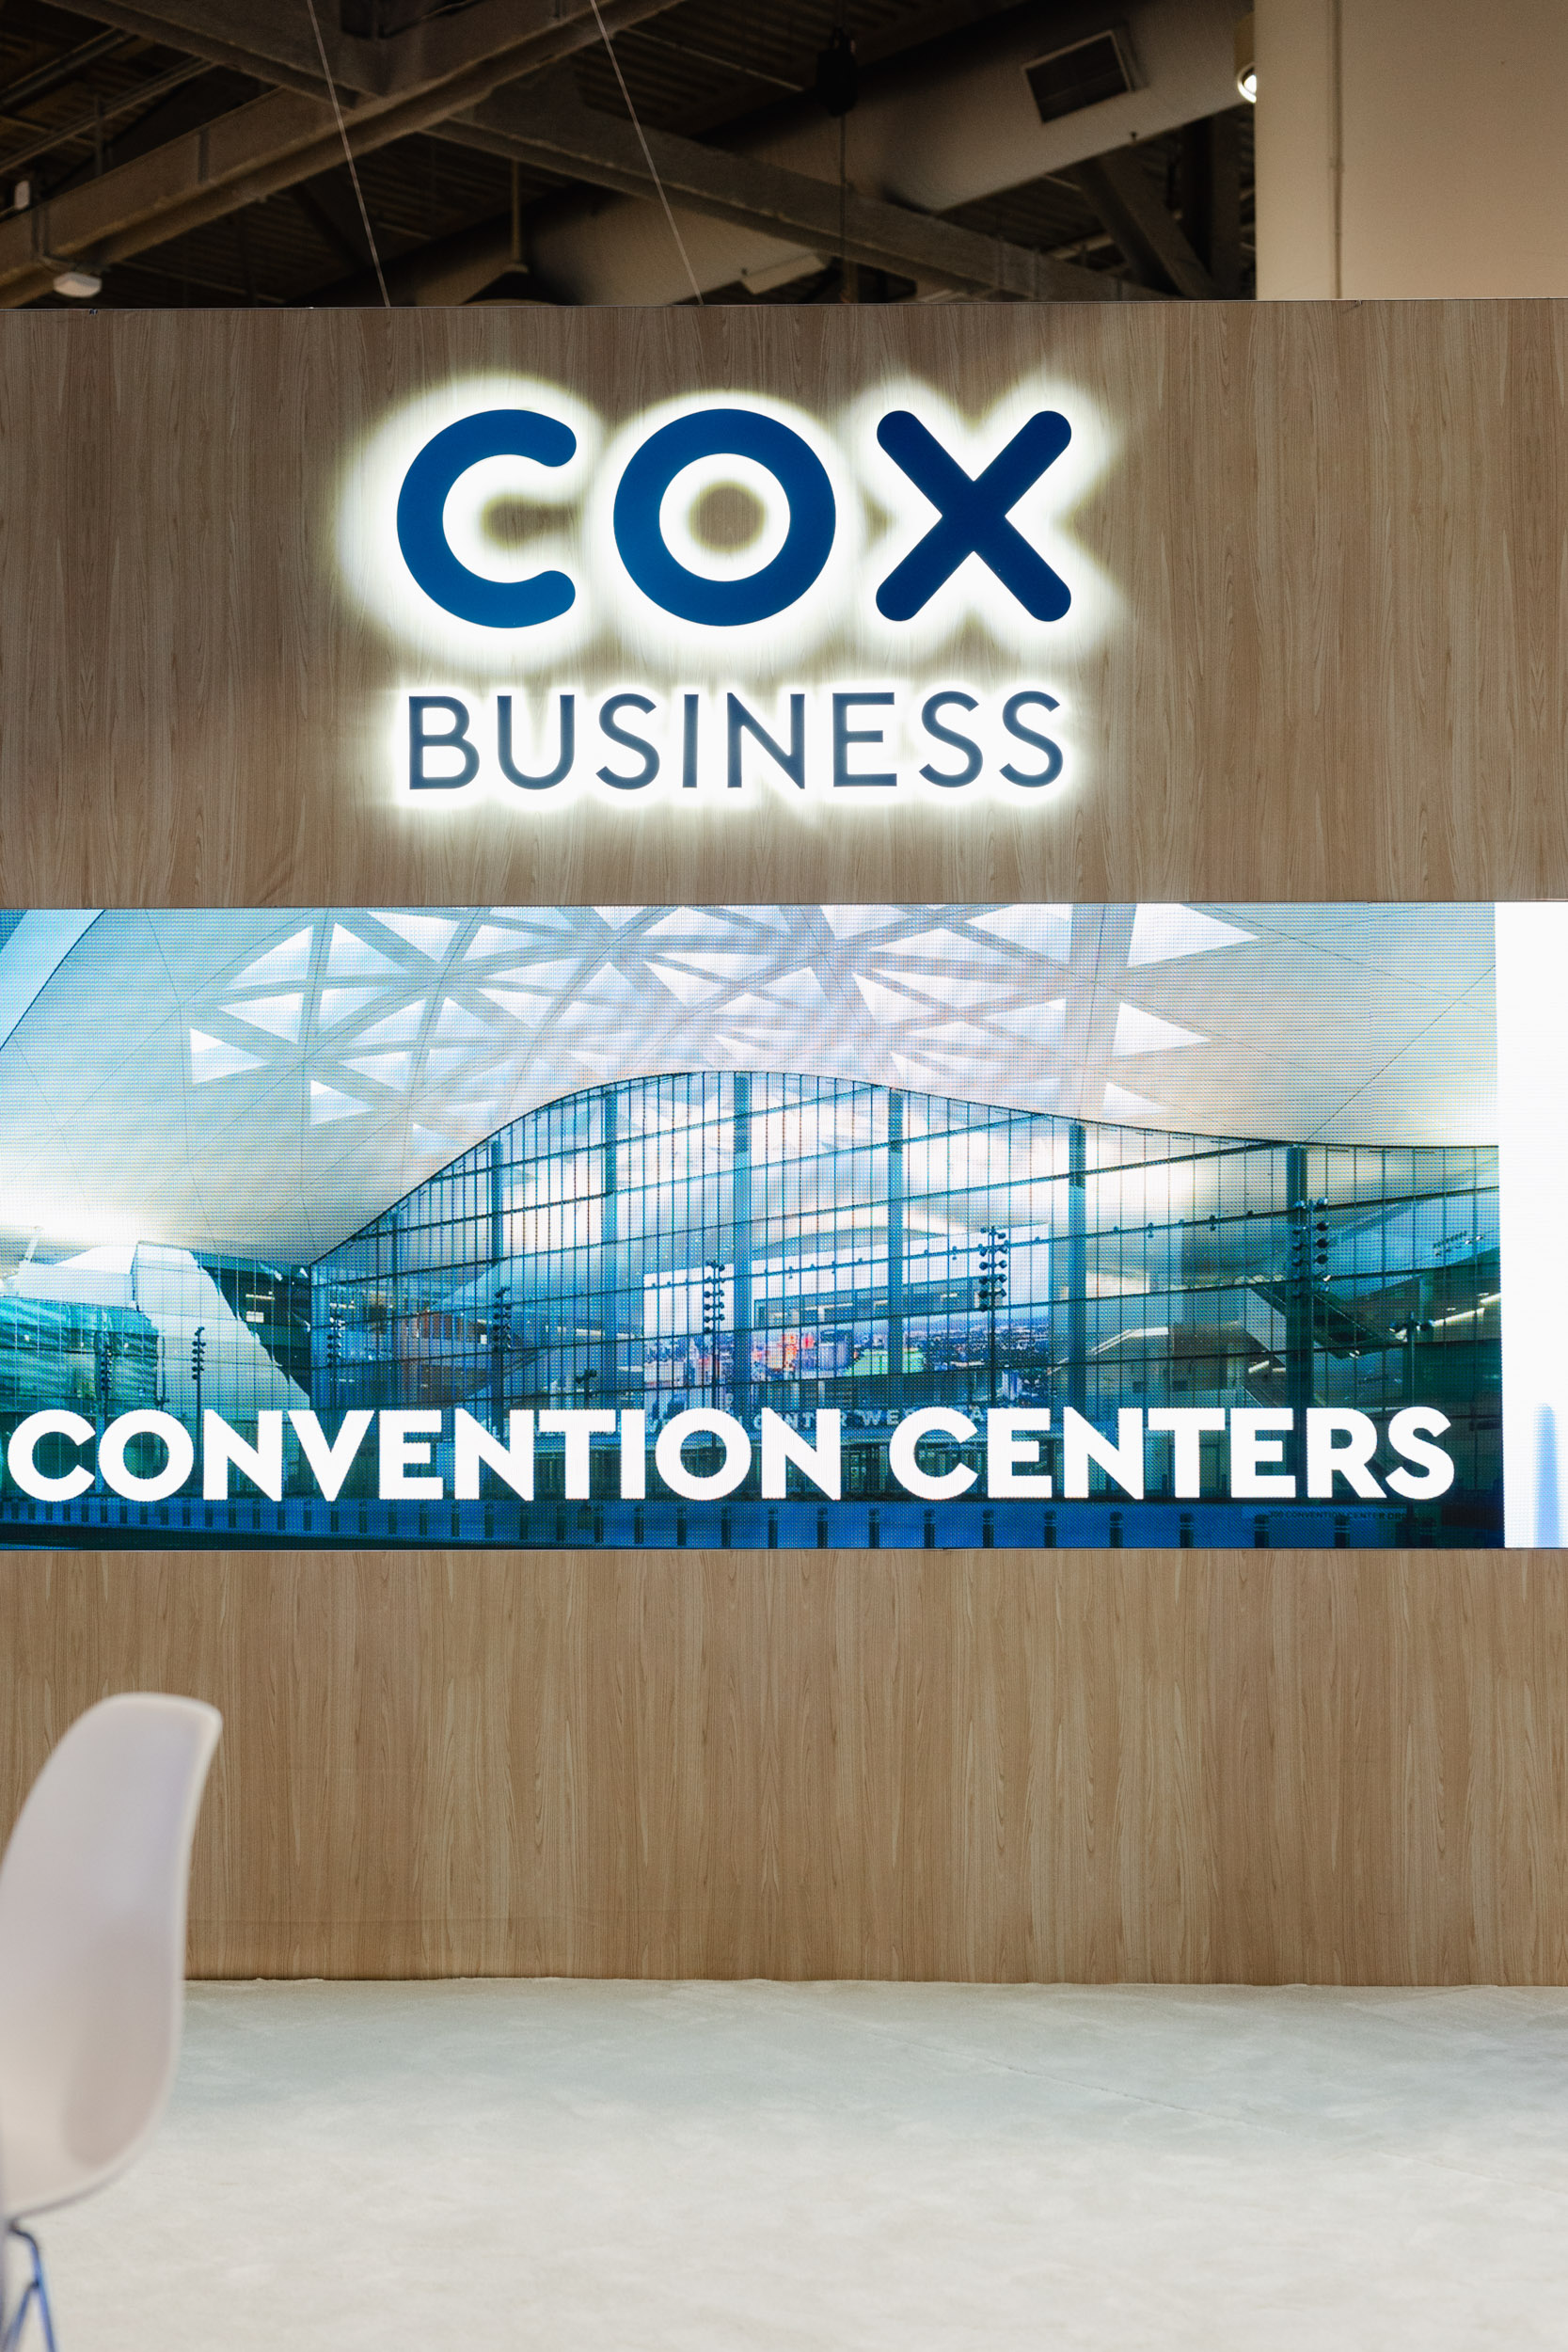 Cox business convention centers offering Toronto Trade show photography services.